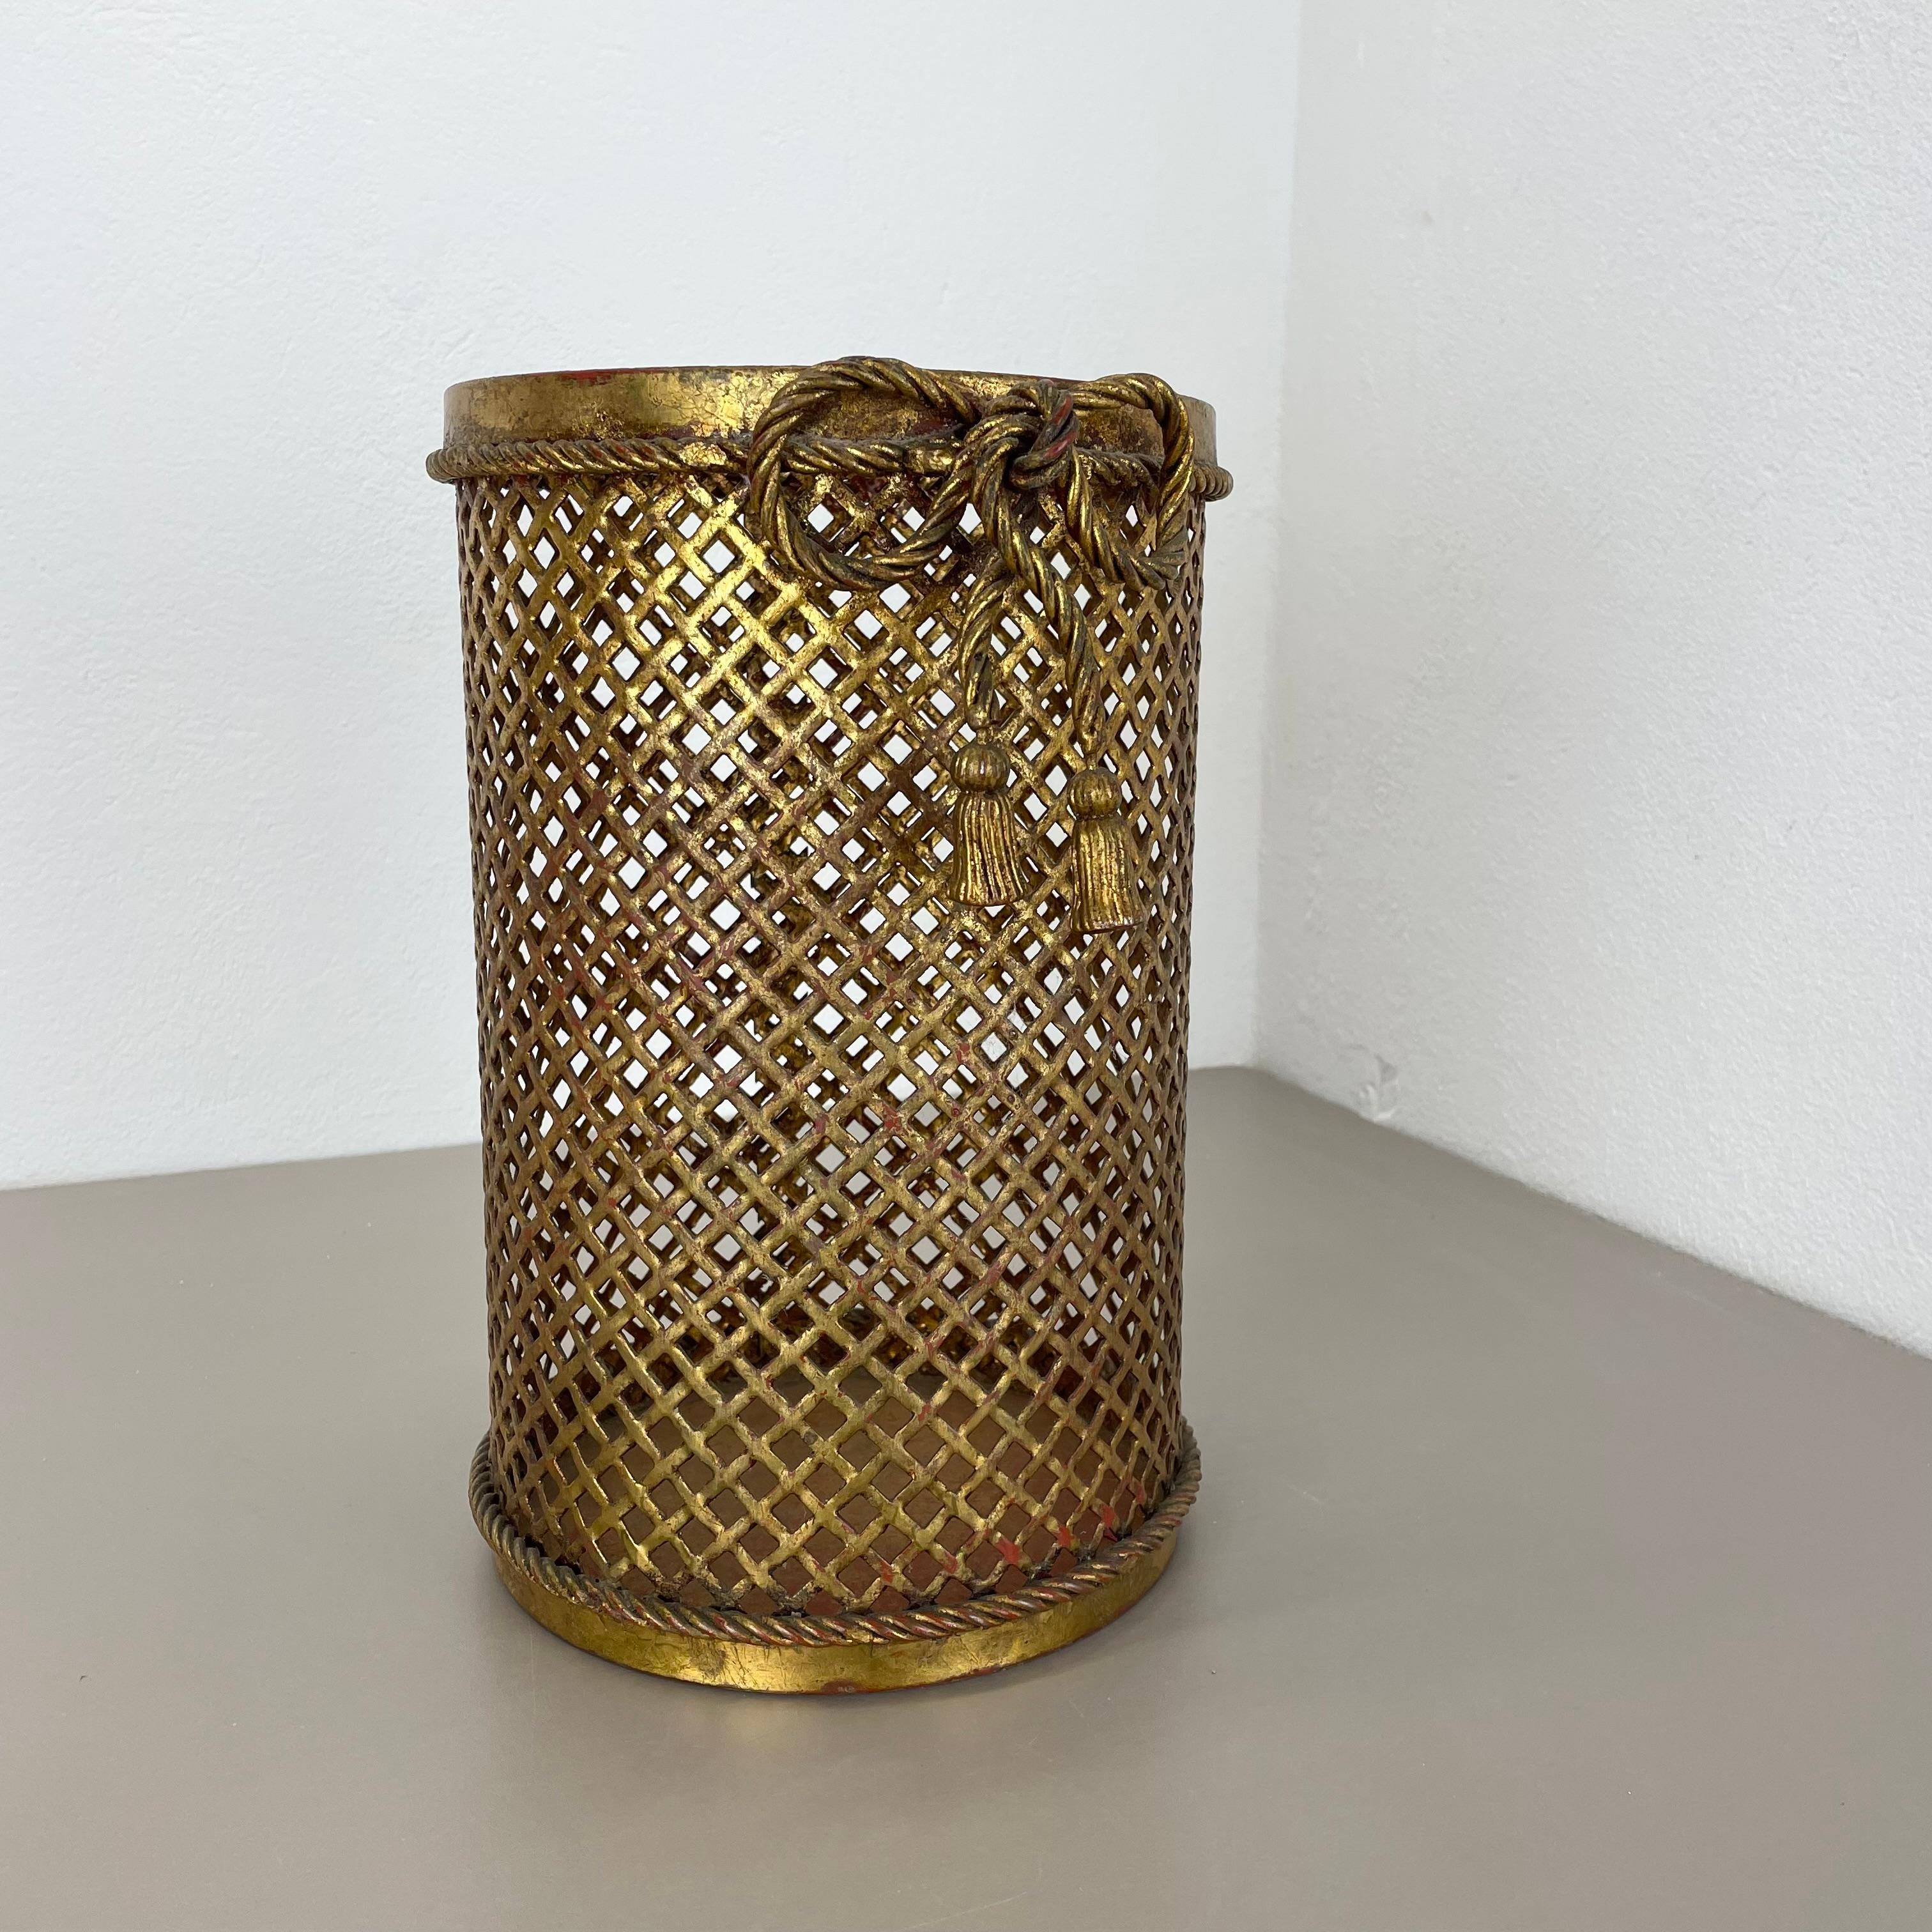 Article: Waste bin paper bin

Origin: Italy

Age: 1950s

Design and Producer: Li Puma, Florence in Italy

This original vintage Hollywood Regency waste bin paper bin was produced in the 1950s in Italy by Li Puma. unique and extraordinary design of